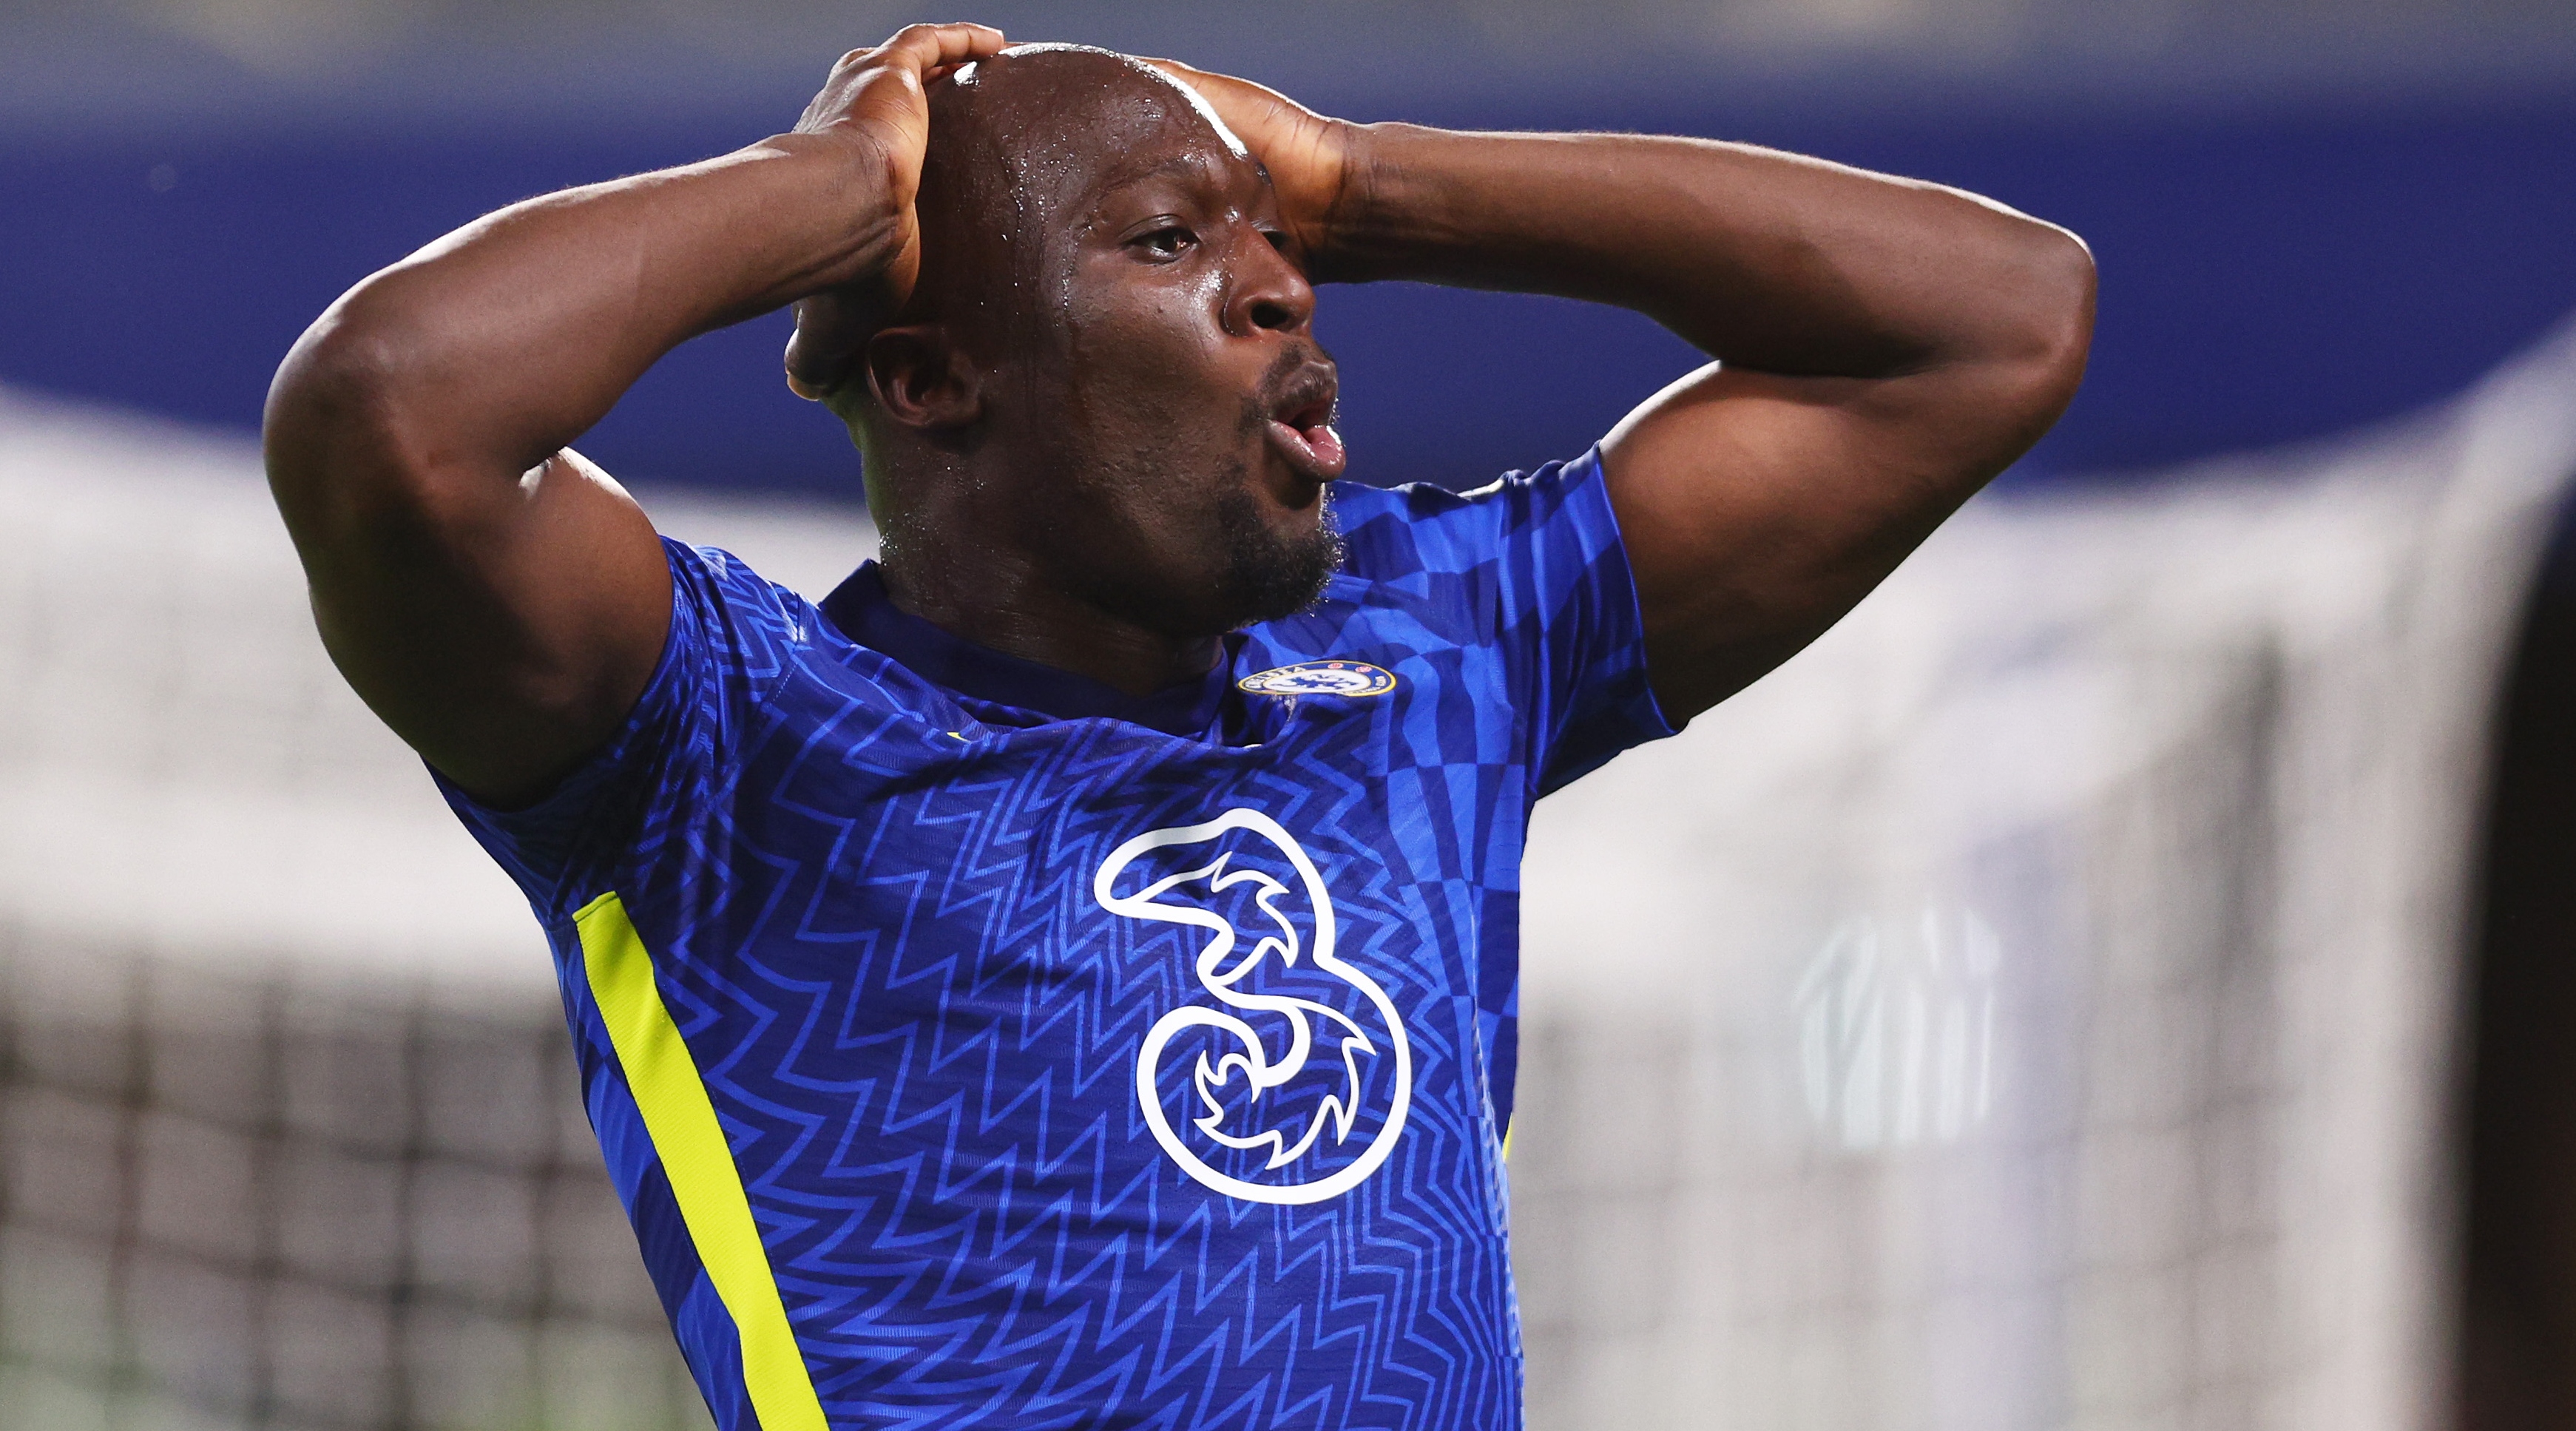 Romelu Lukaku of Chelsea reacts during the Premier League match between Chelsea and Leicester City at Stamford Bridge on May 19, 2022 in London, United Kingdom.